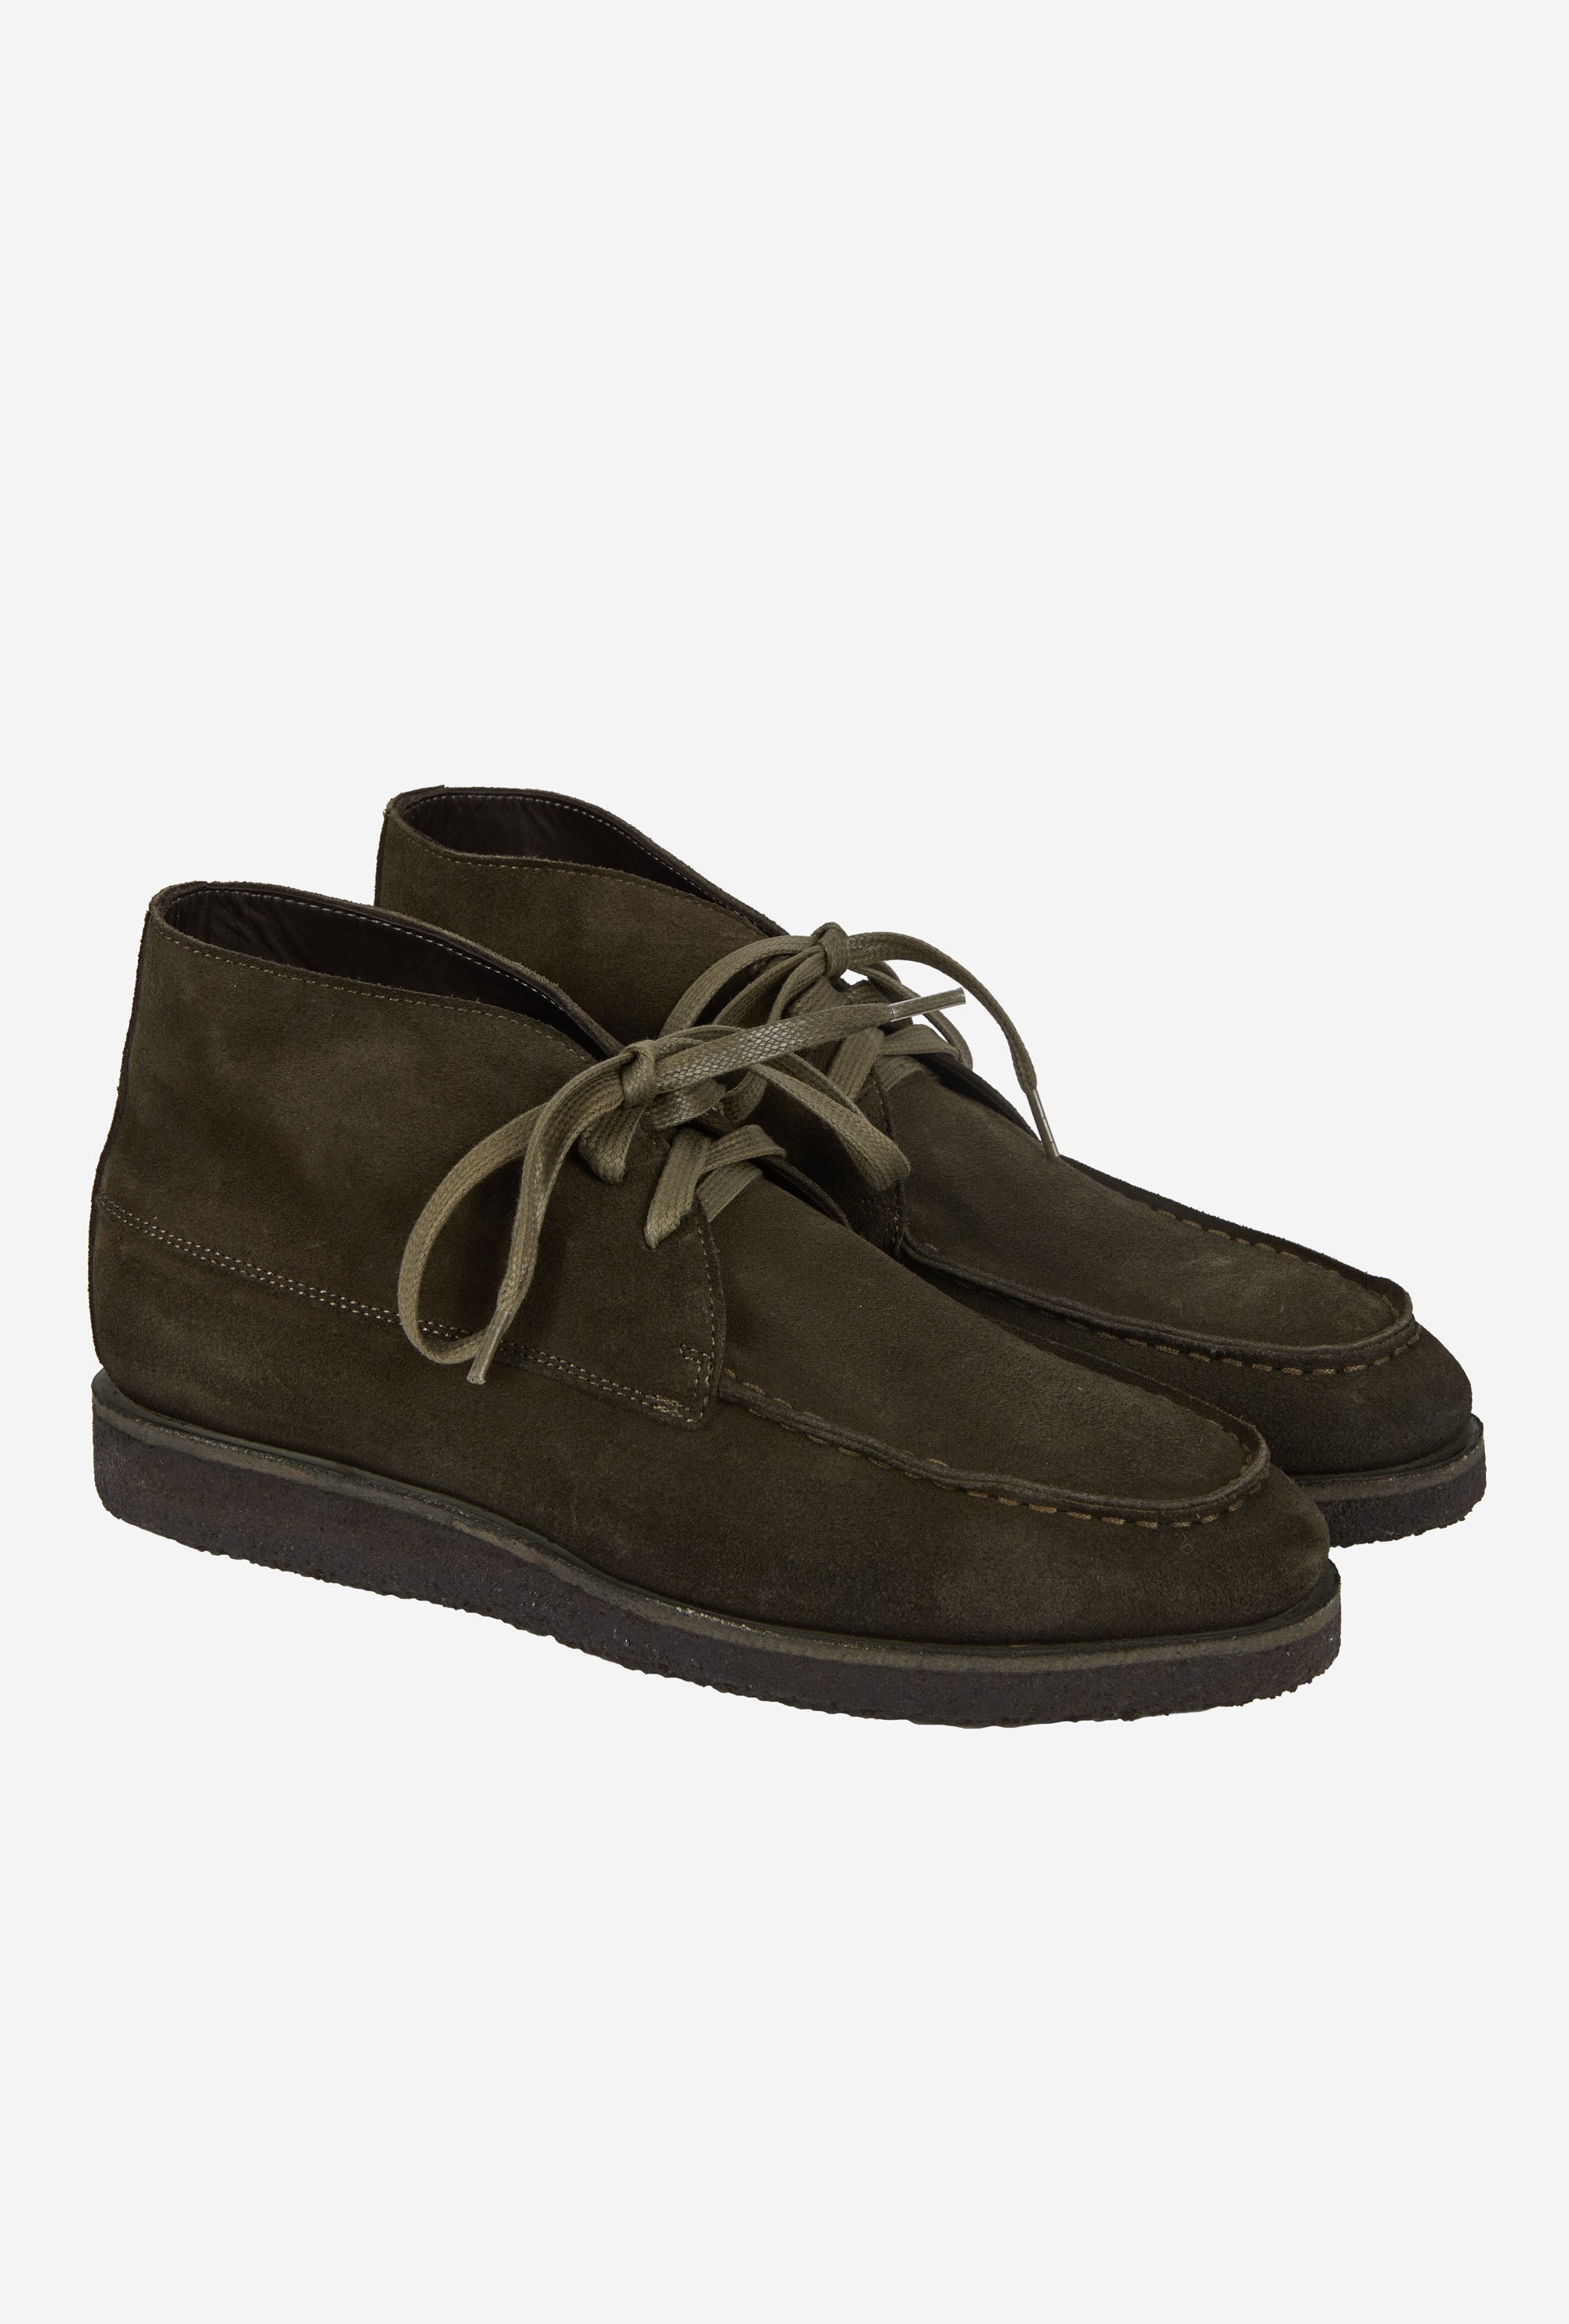 Alpine Boot Crepe Sole Forest Suede